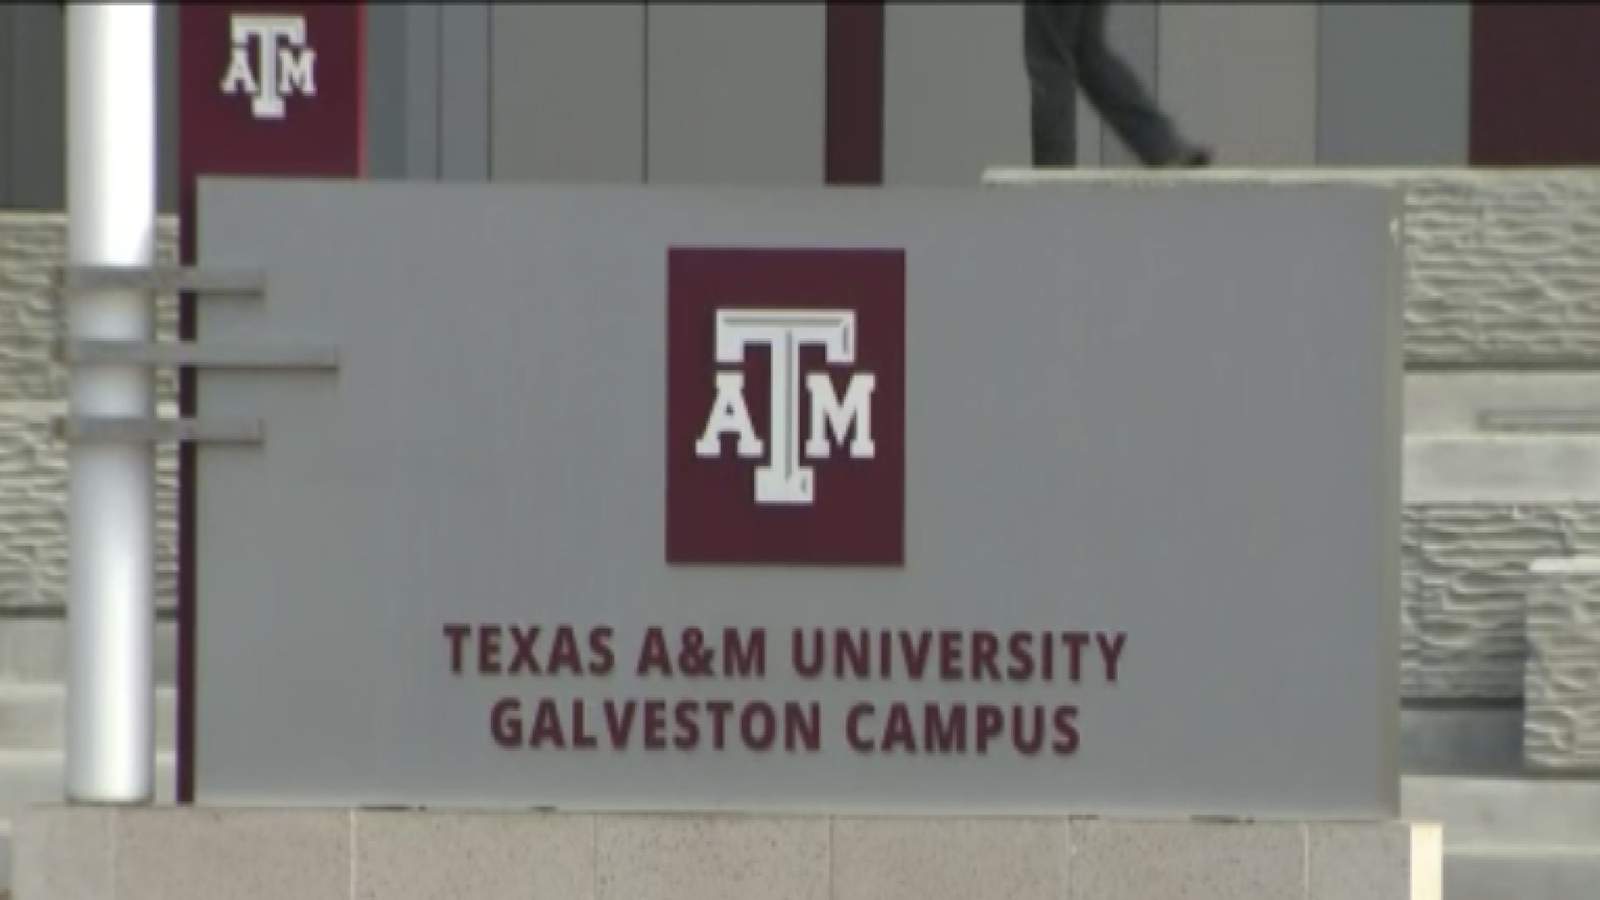 Body found in search for missing Texas A&M Galveston student, officials say